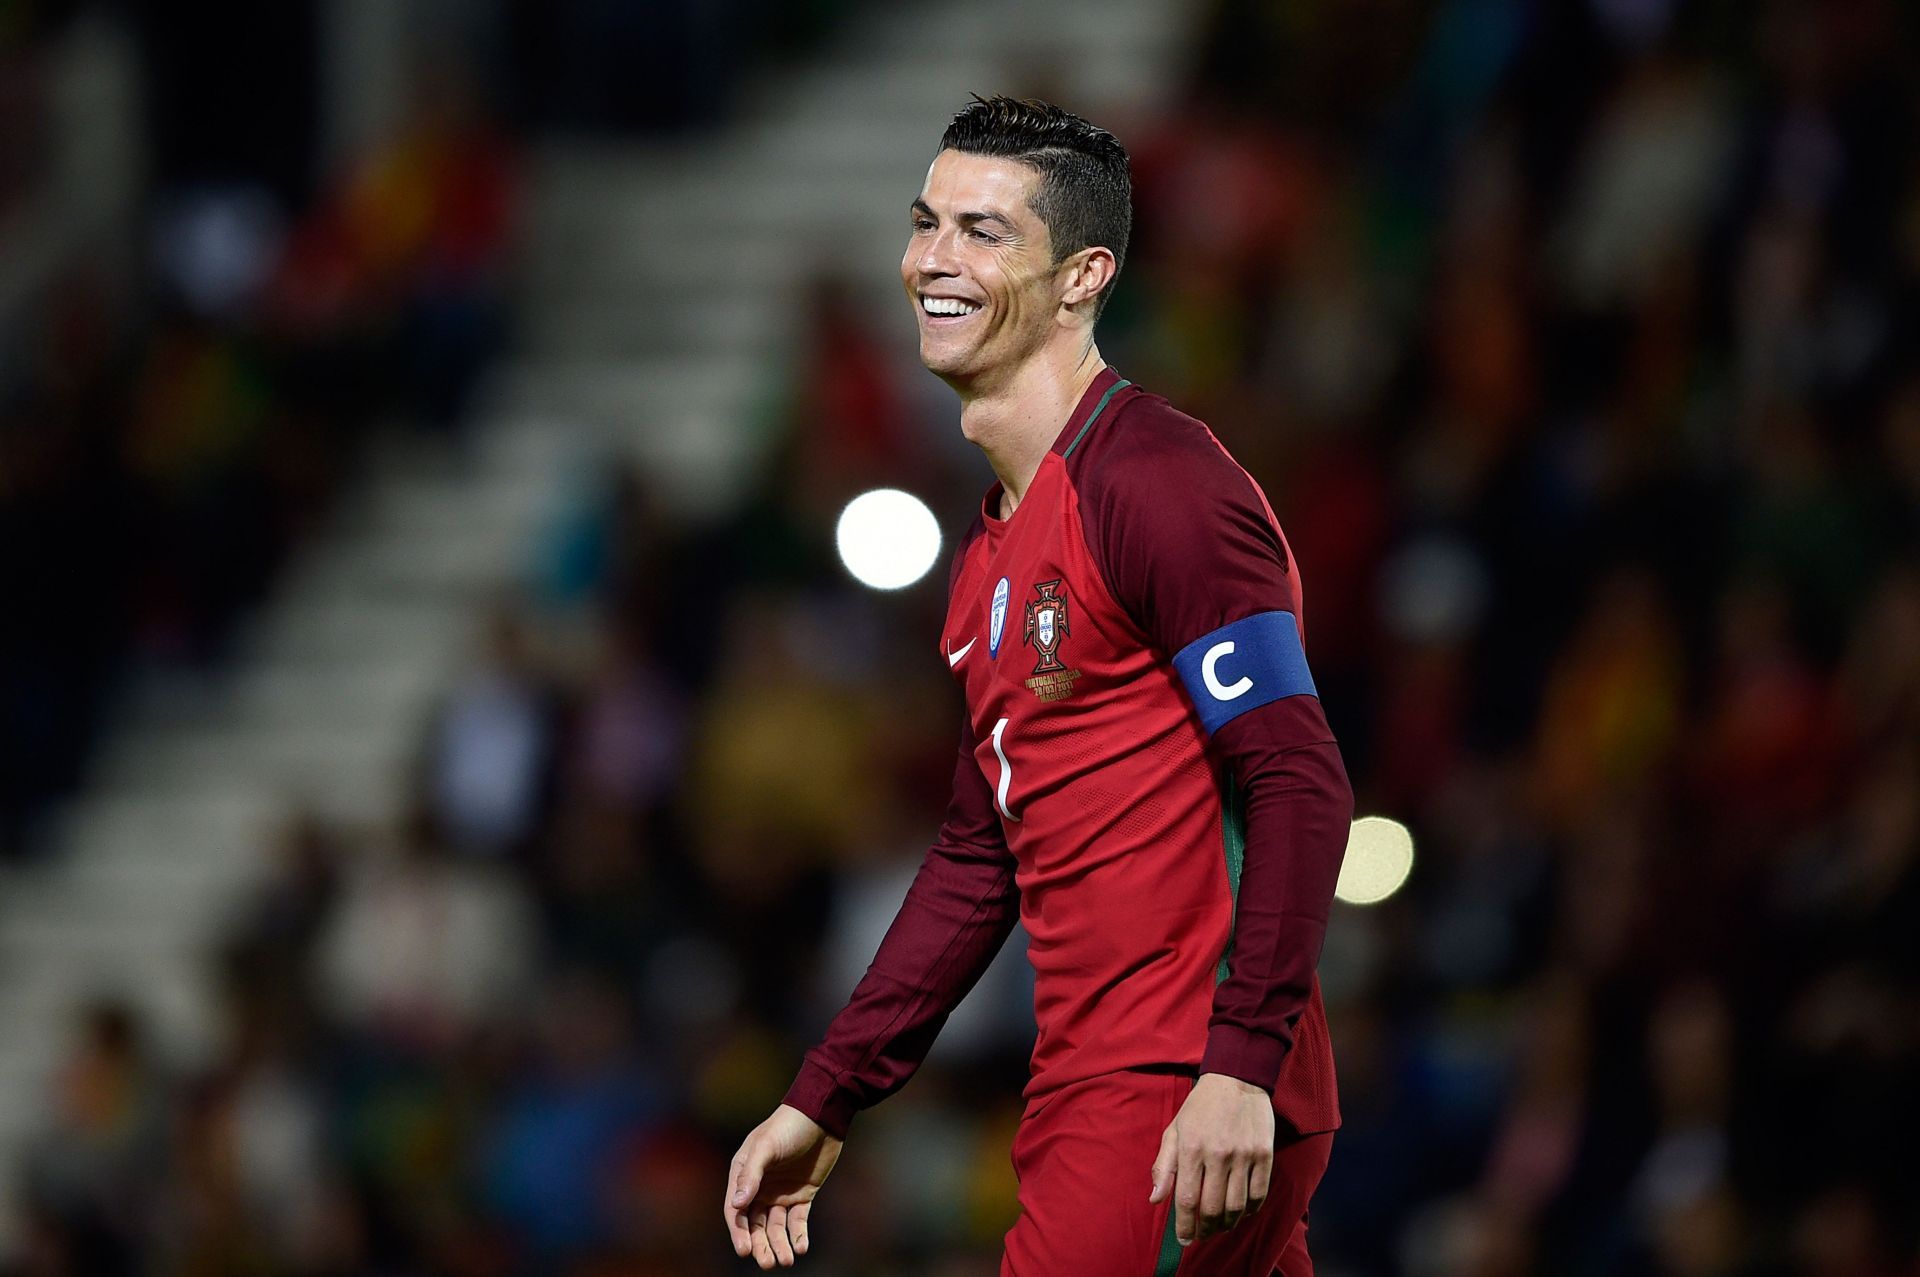 Ronaldo reacts during a game against Sweden.